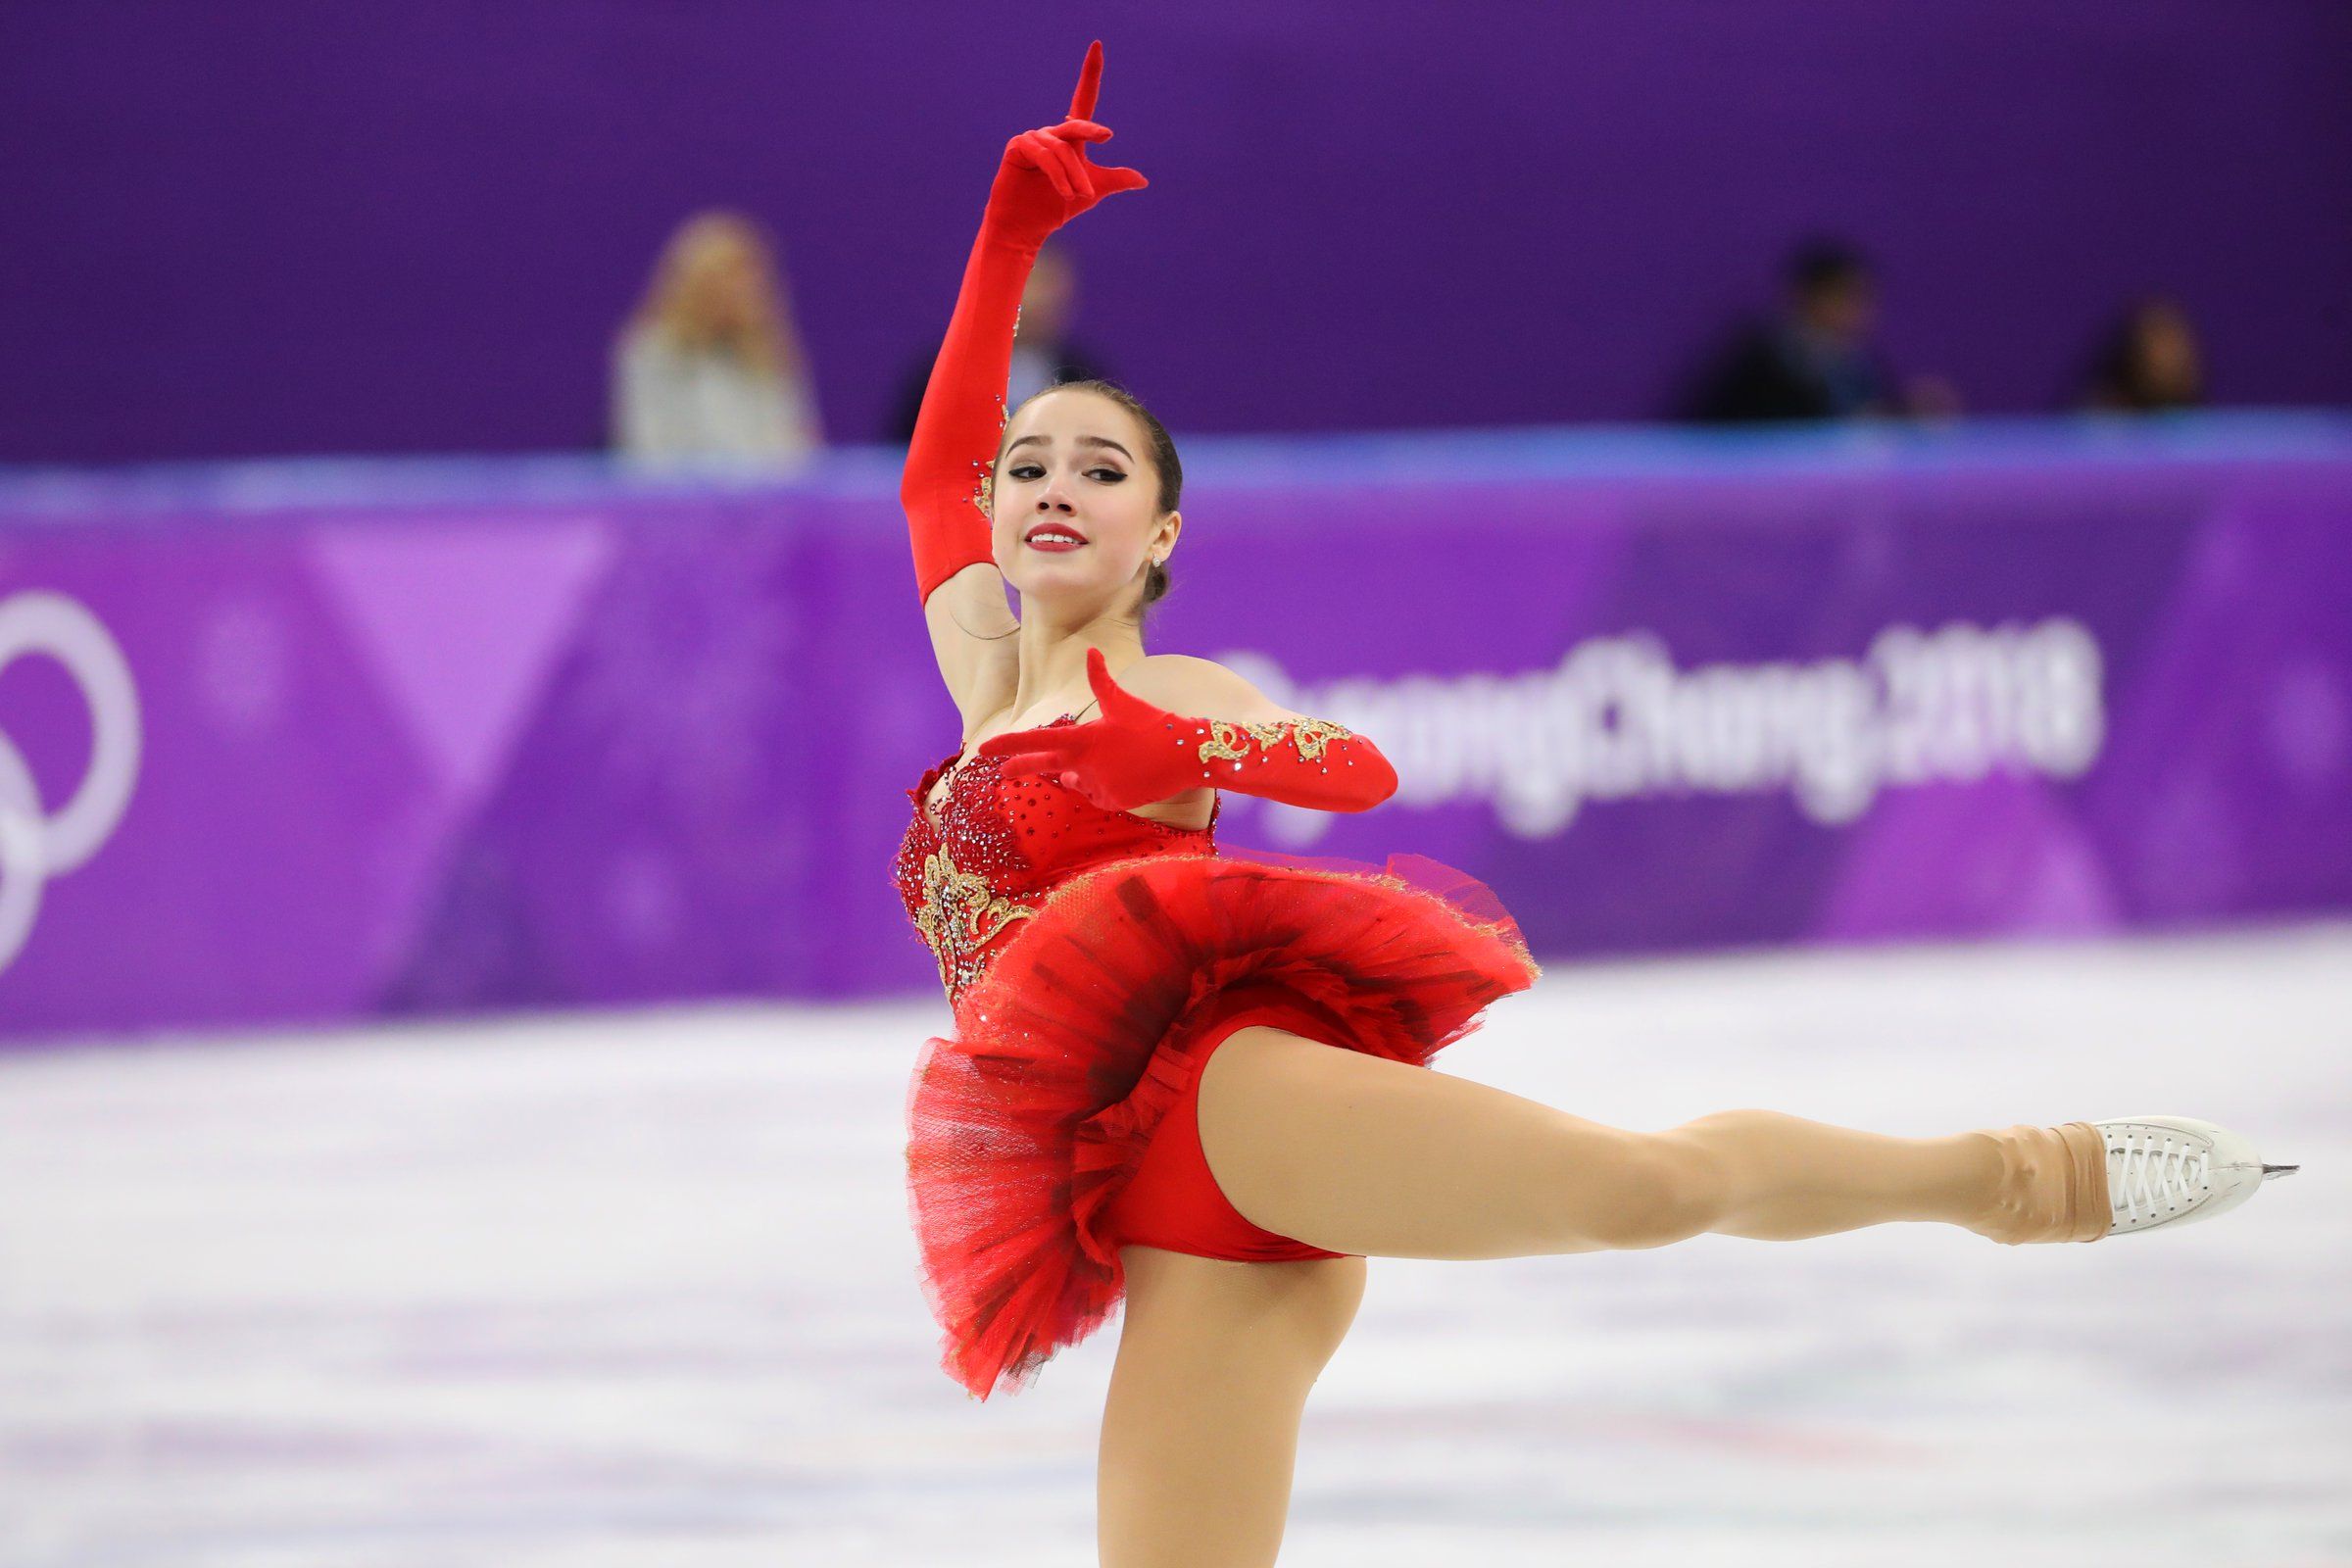 Americans come up empty handed again as Russias Alina Zagitova captures gold in womens free skate The Seattle Times